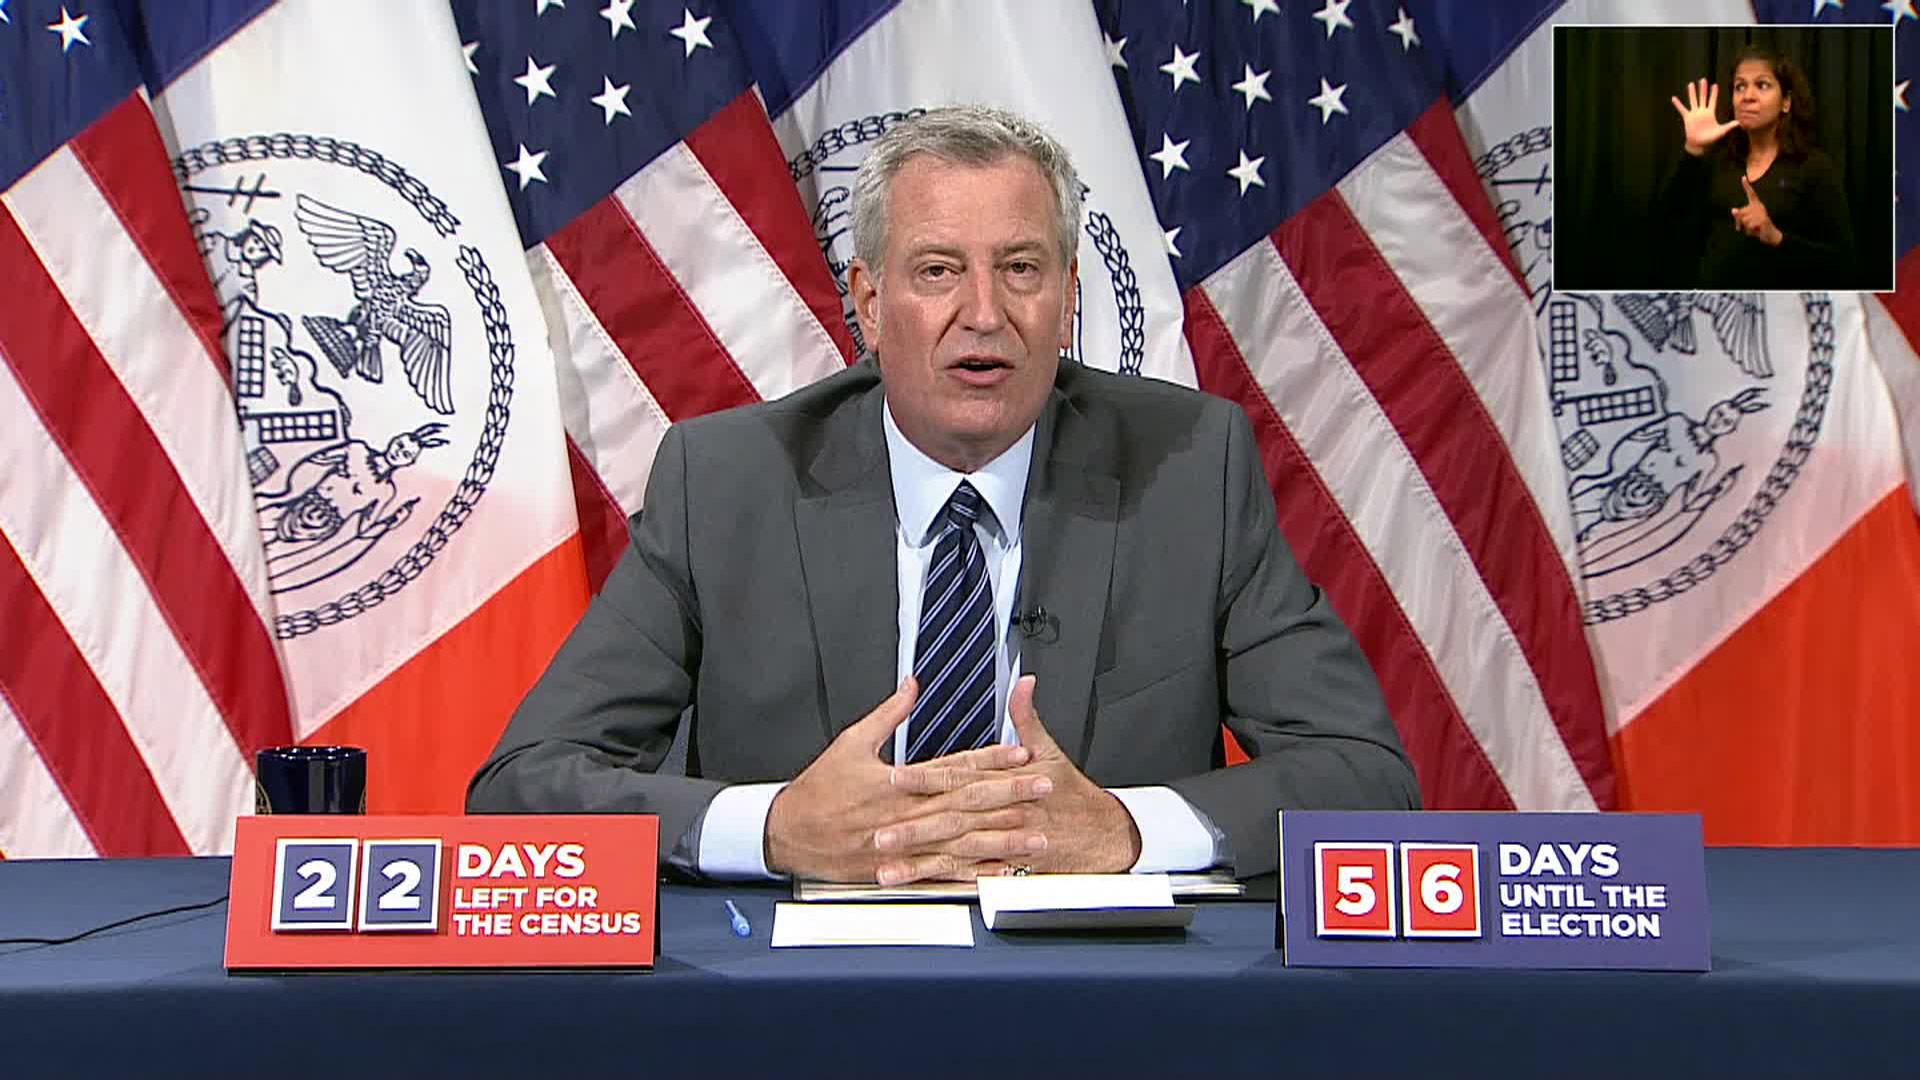 New York City Mayor Bill de Blasio speaks during a press conference in New York on September 8.